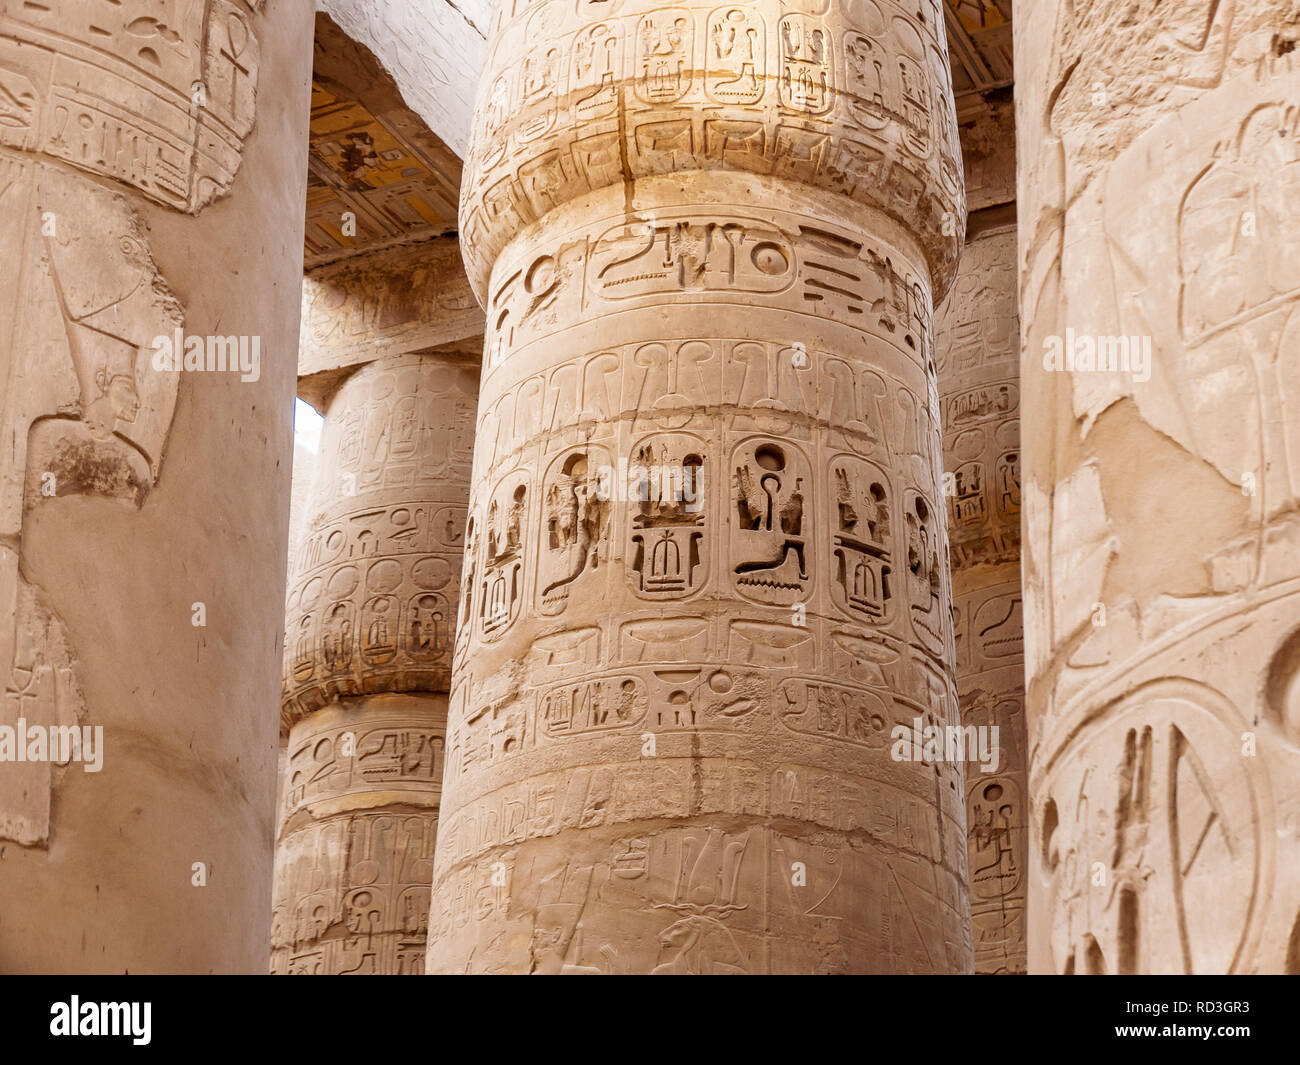 Karnak Column Details from the Ancient Egyptian Civilization Stock Photo